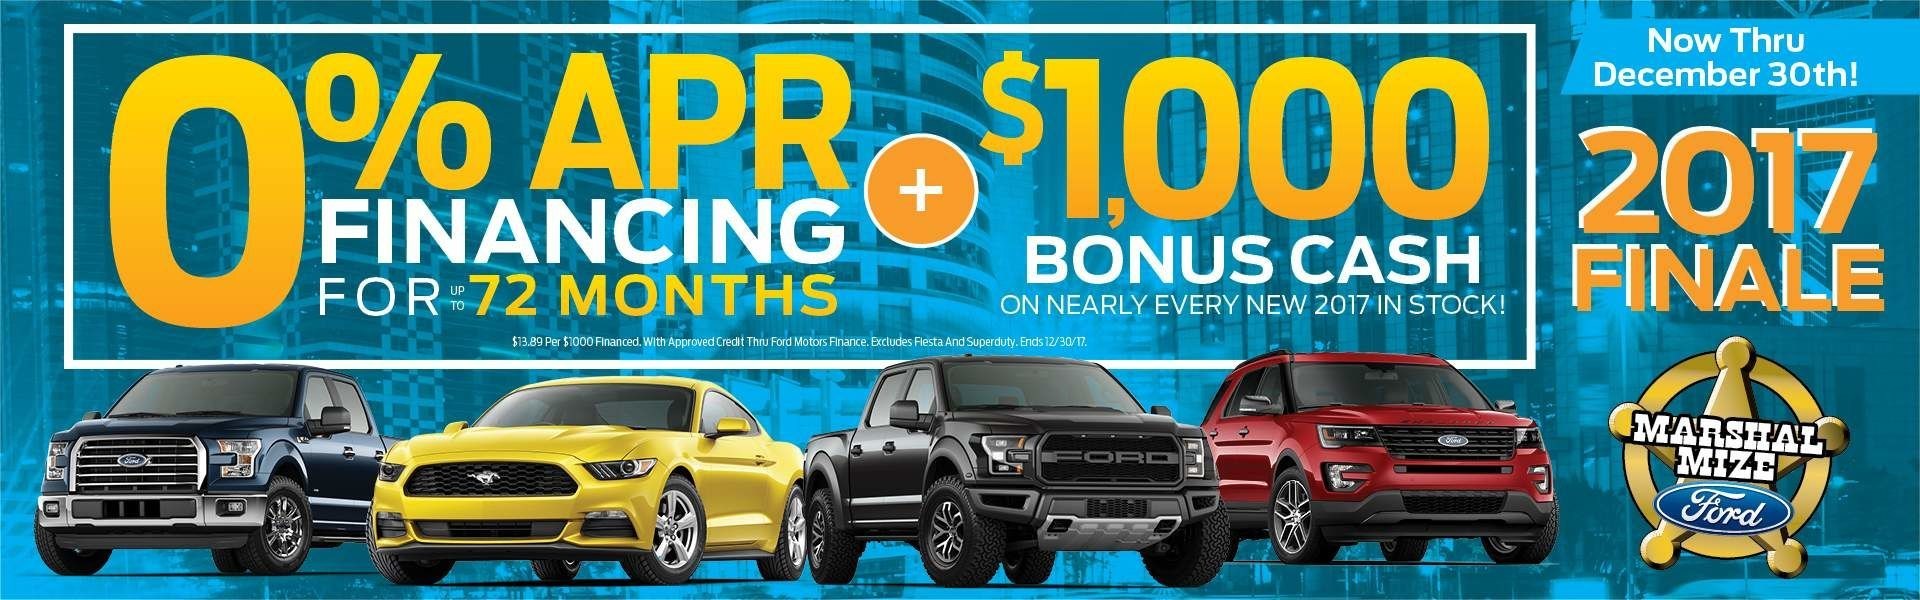 Chattanooga-area car shoppers who are looking for holiday savings on a new car, truck or crossover will discover the lowest prices of the year on select 2017 Ford models available at Marshal Mize Ford through December 30.